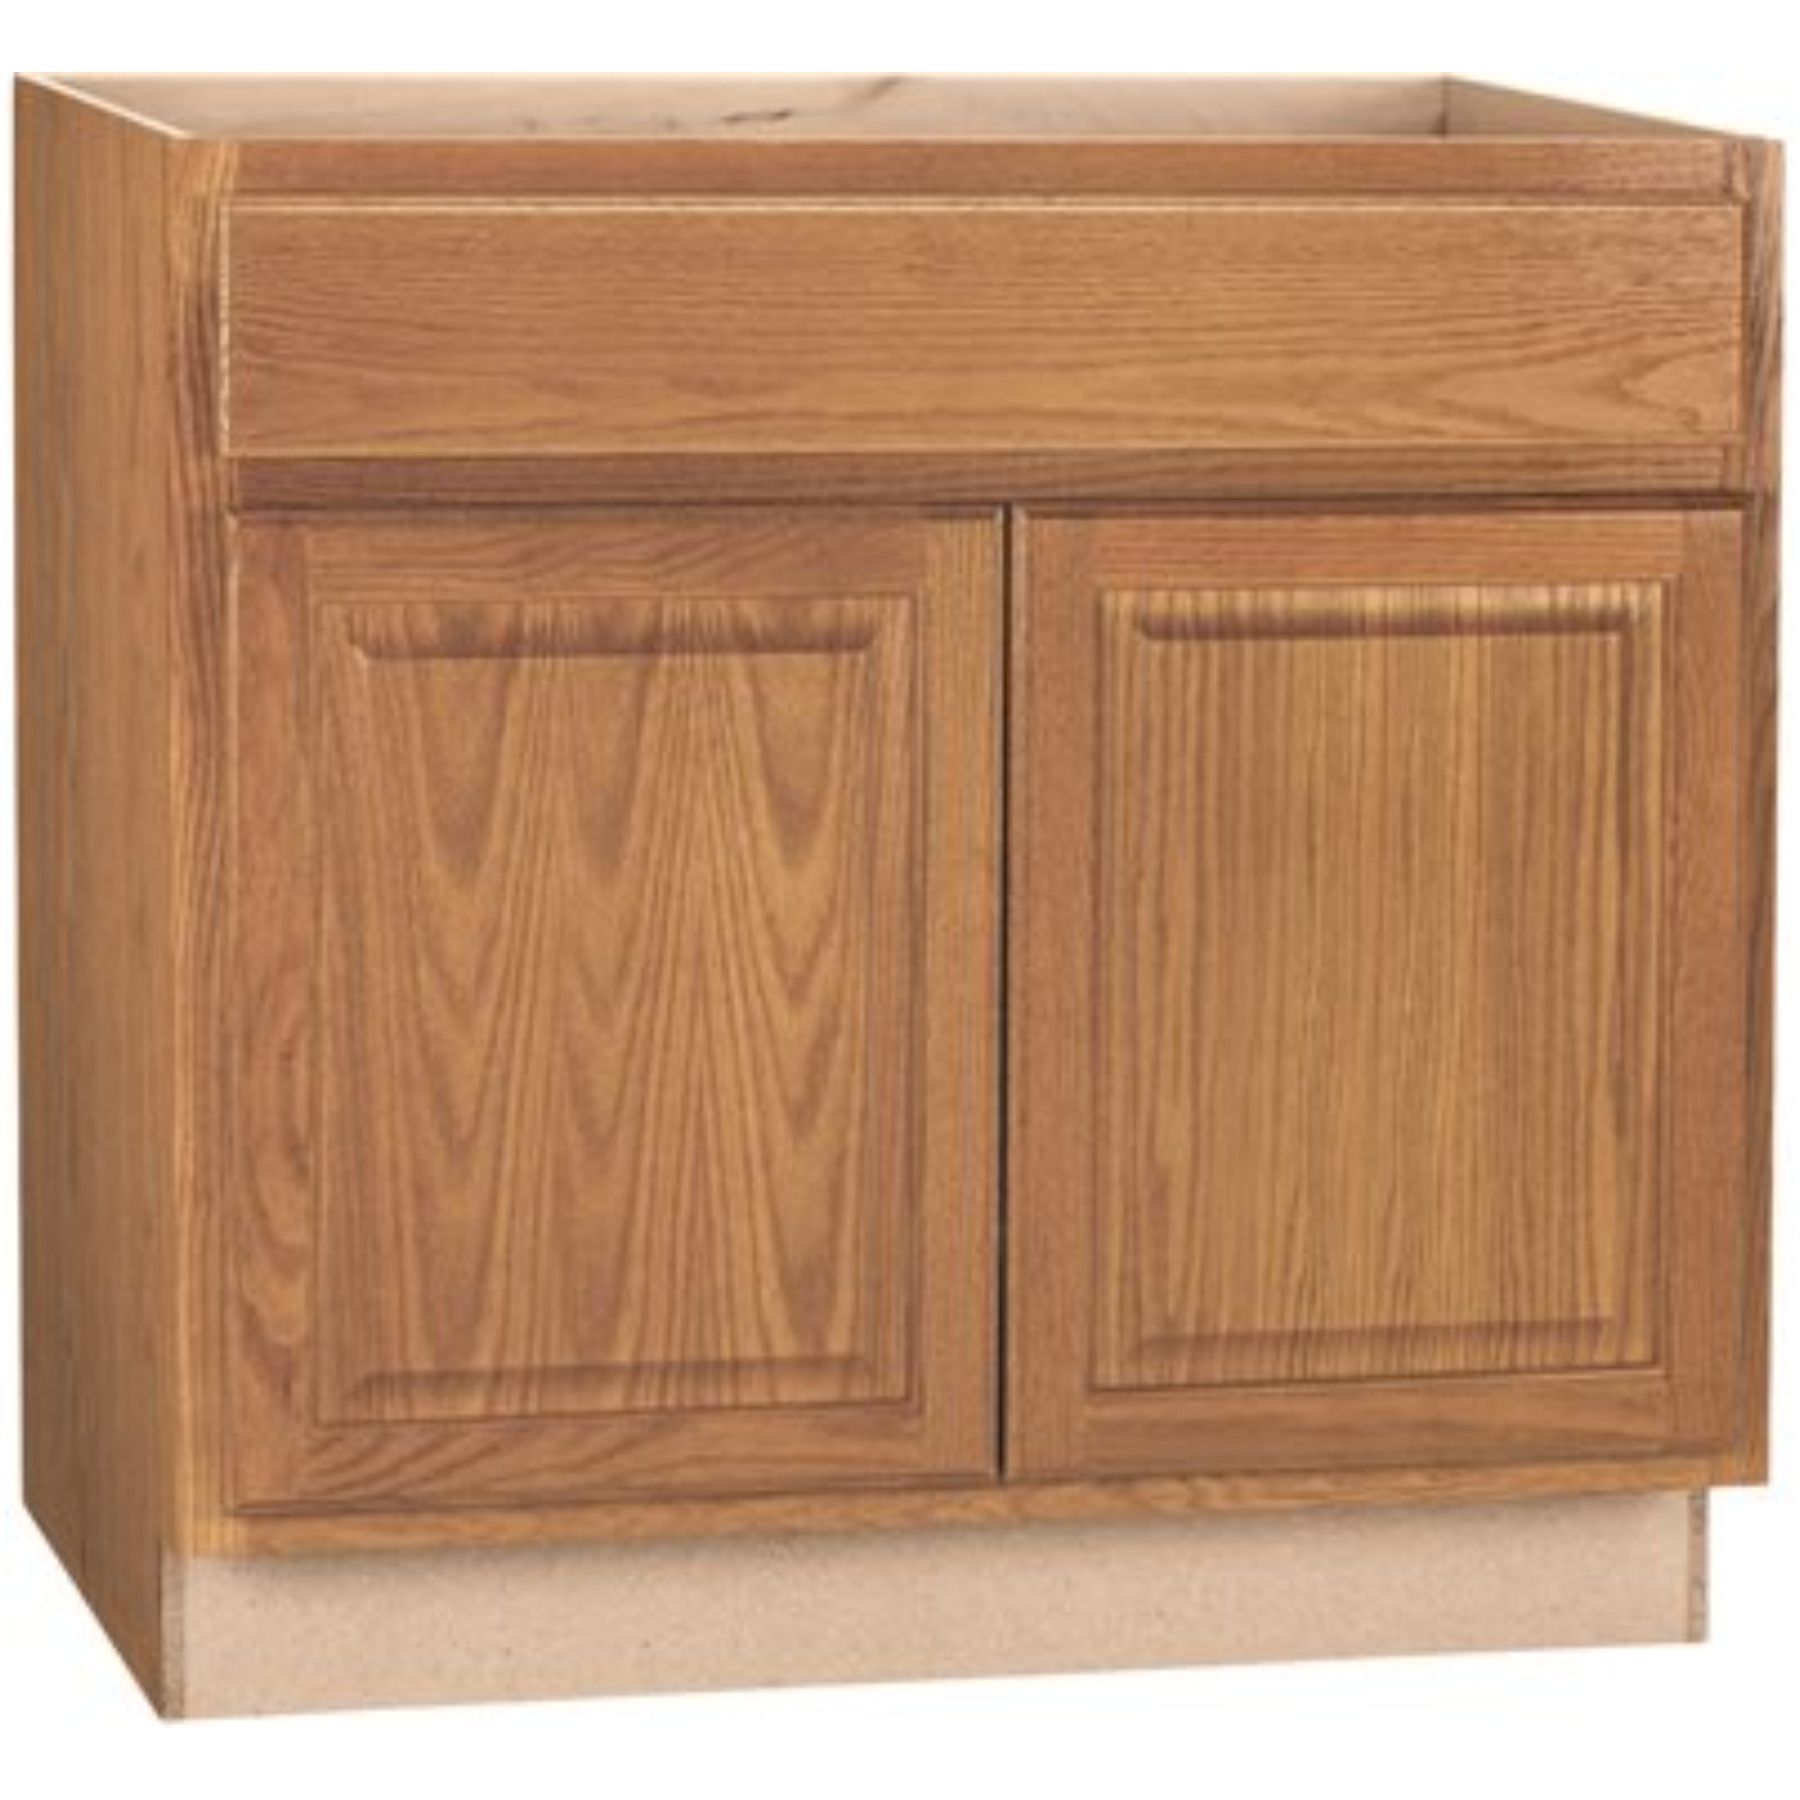 RSI HOME PRODUCTS ANDOVER SHAKER ADA SINK BASE CABINET, JAVA, 36 IN.